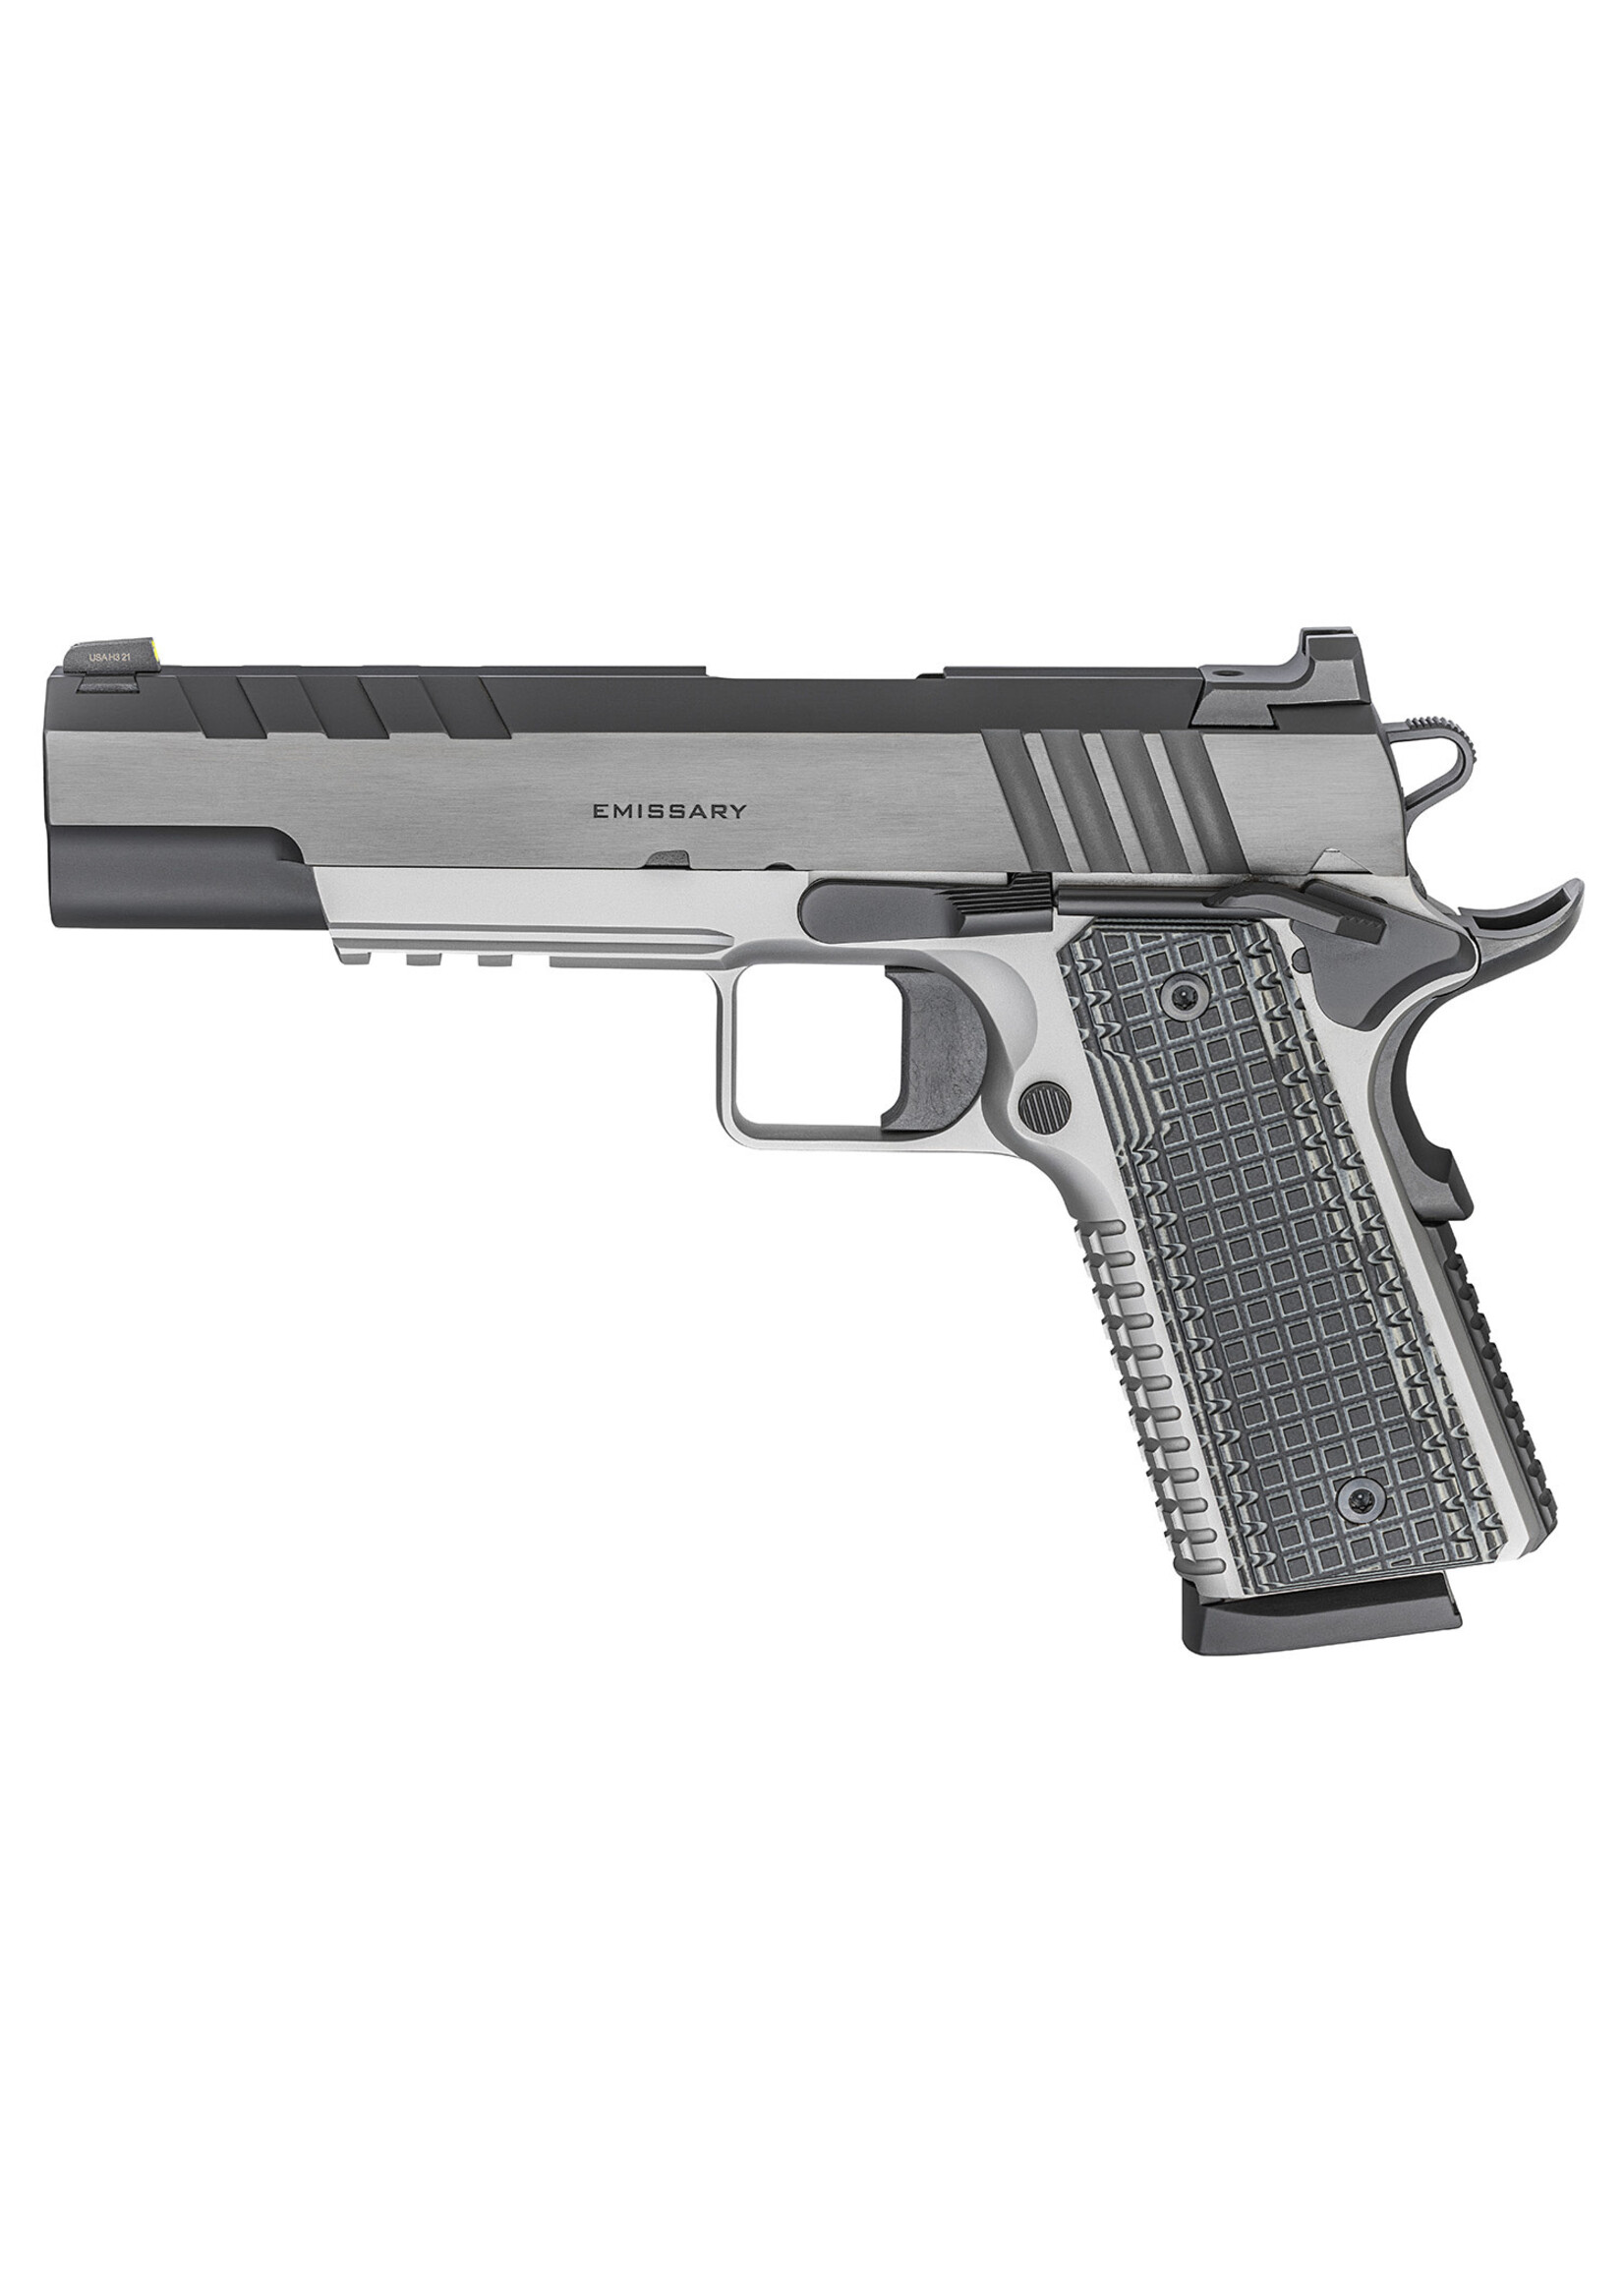 Springfield Armory Springfield Armory PX9220L 1911 Emissary 45 ACP Caliber with 5" Barrel, 8+1 Capacity, Stainless Steel Finish Picatinny Rail/Beavertail Frame, Tri-Top Cut Blued Carbon Steel Slide & Black VZ Thin-Line G10 Grip